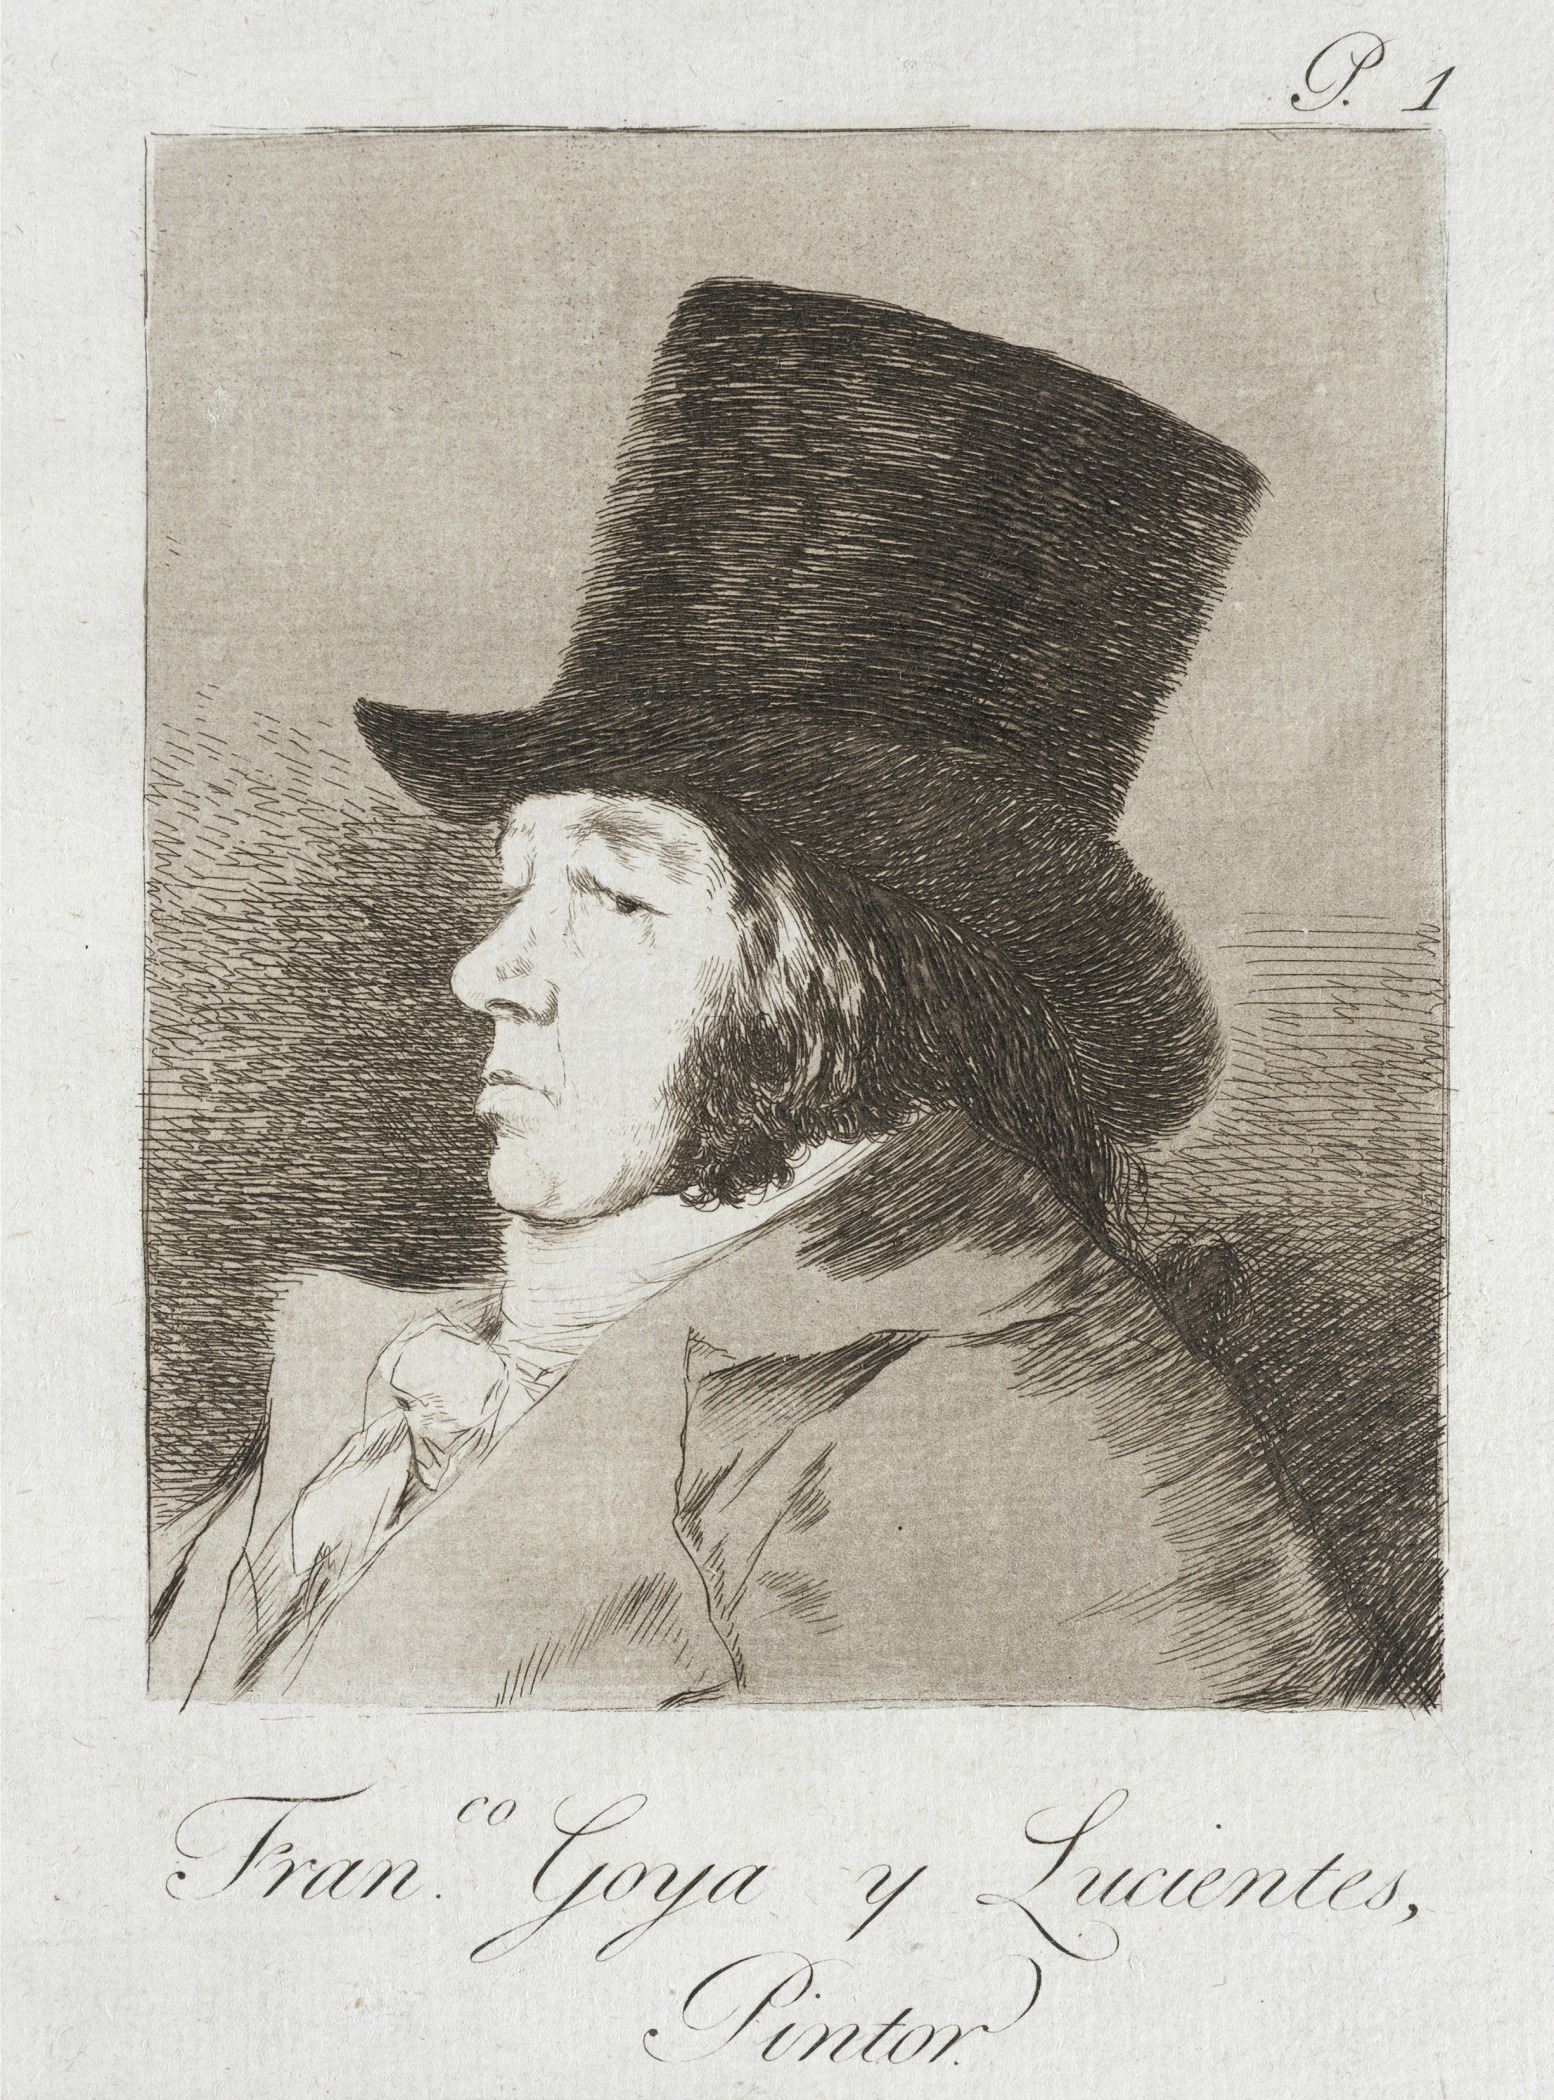 an engraving of thomas campbell, who was the duke of wellington